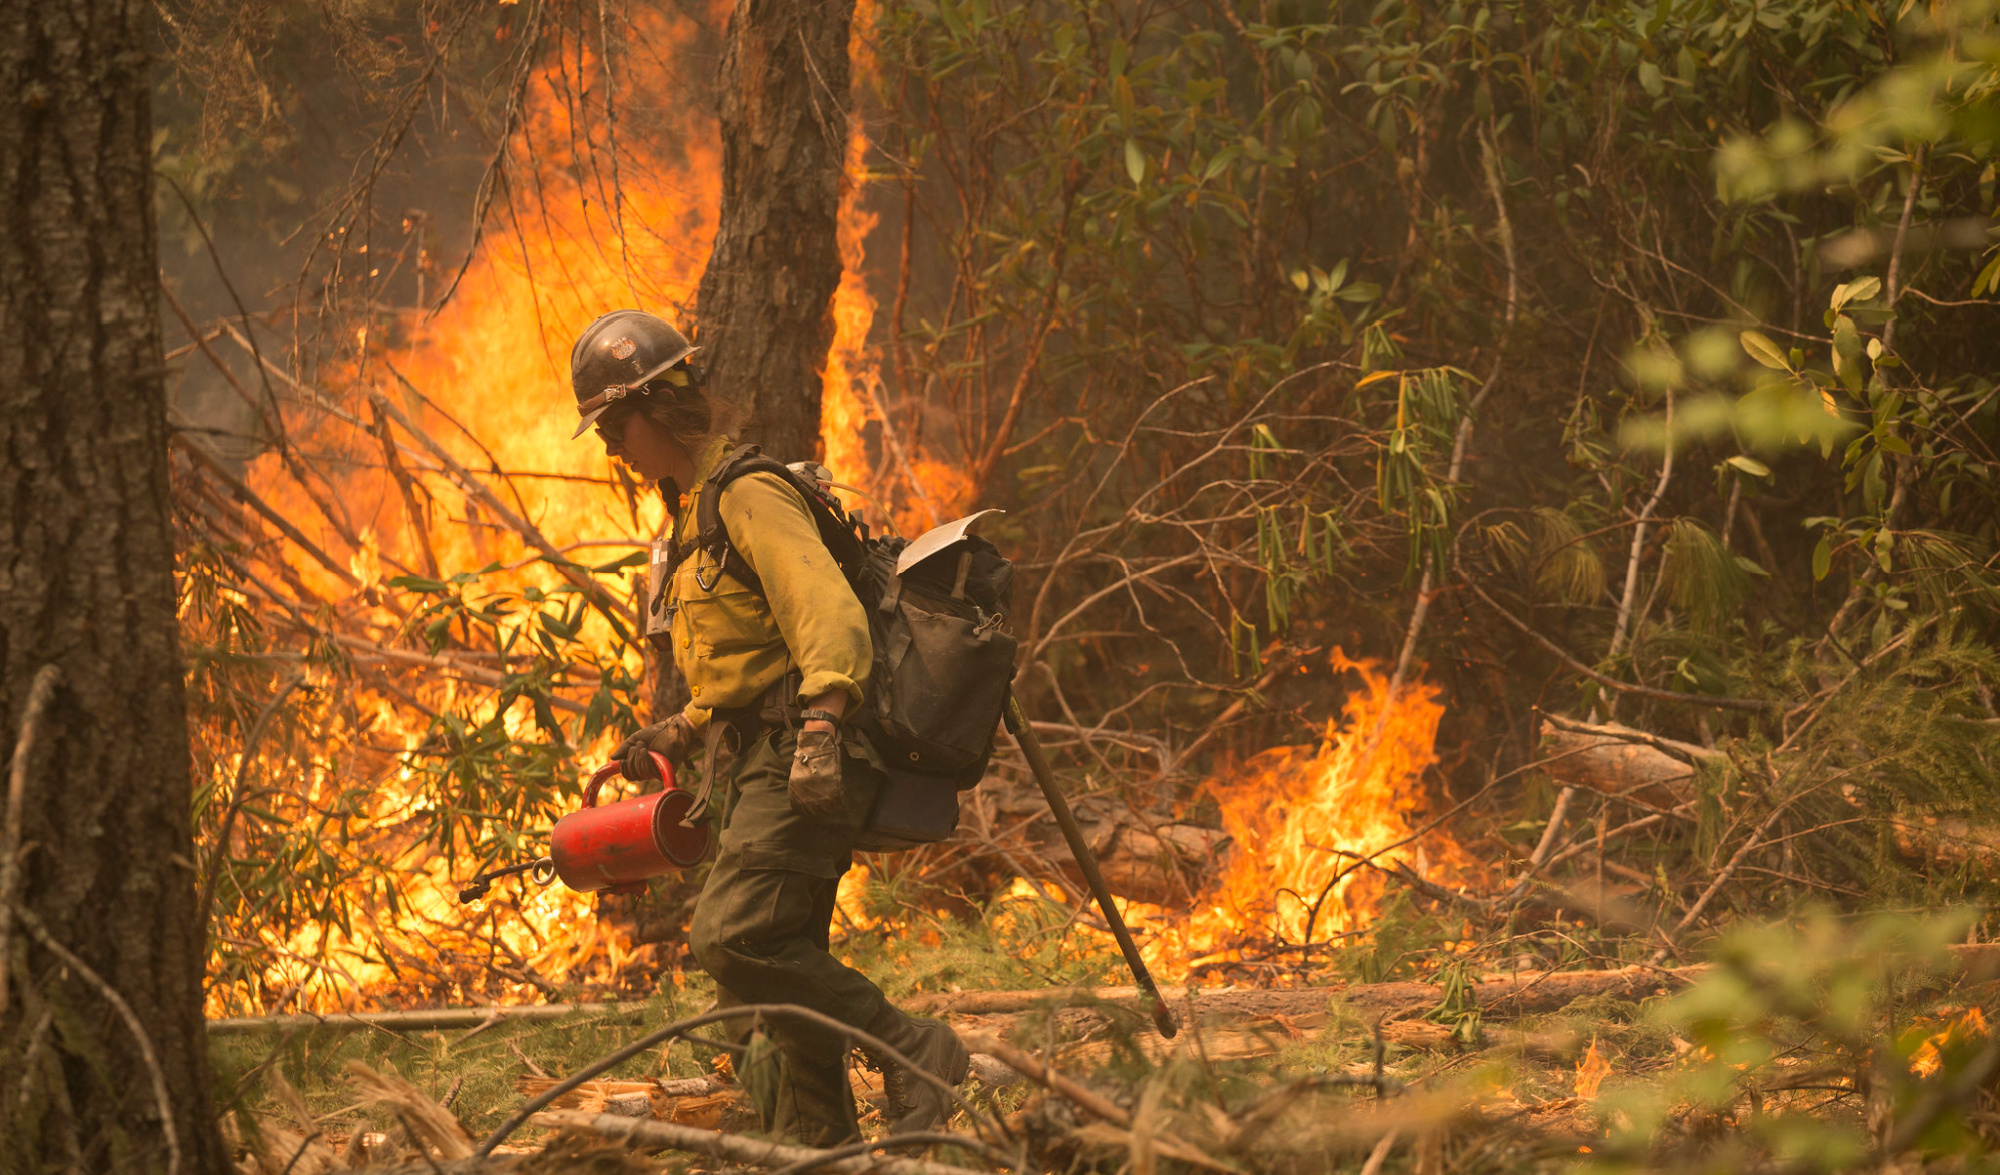 A wildland firefighter conducts prescribed burns to reduce wildfire risk.